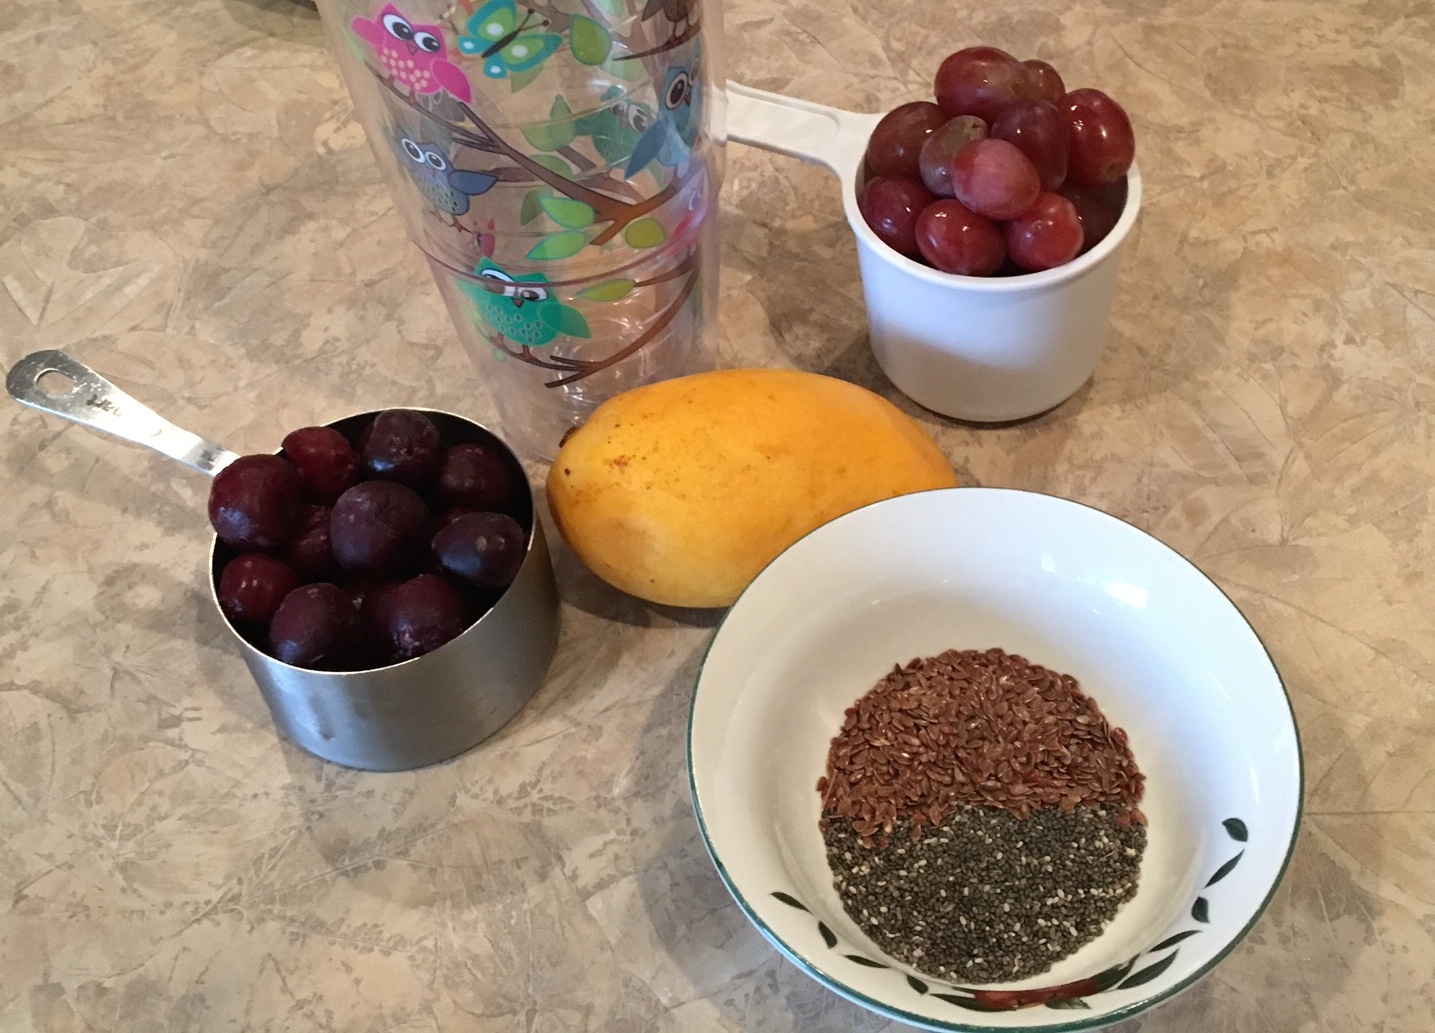 Ingredients for a colorful smoothie